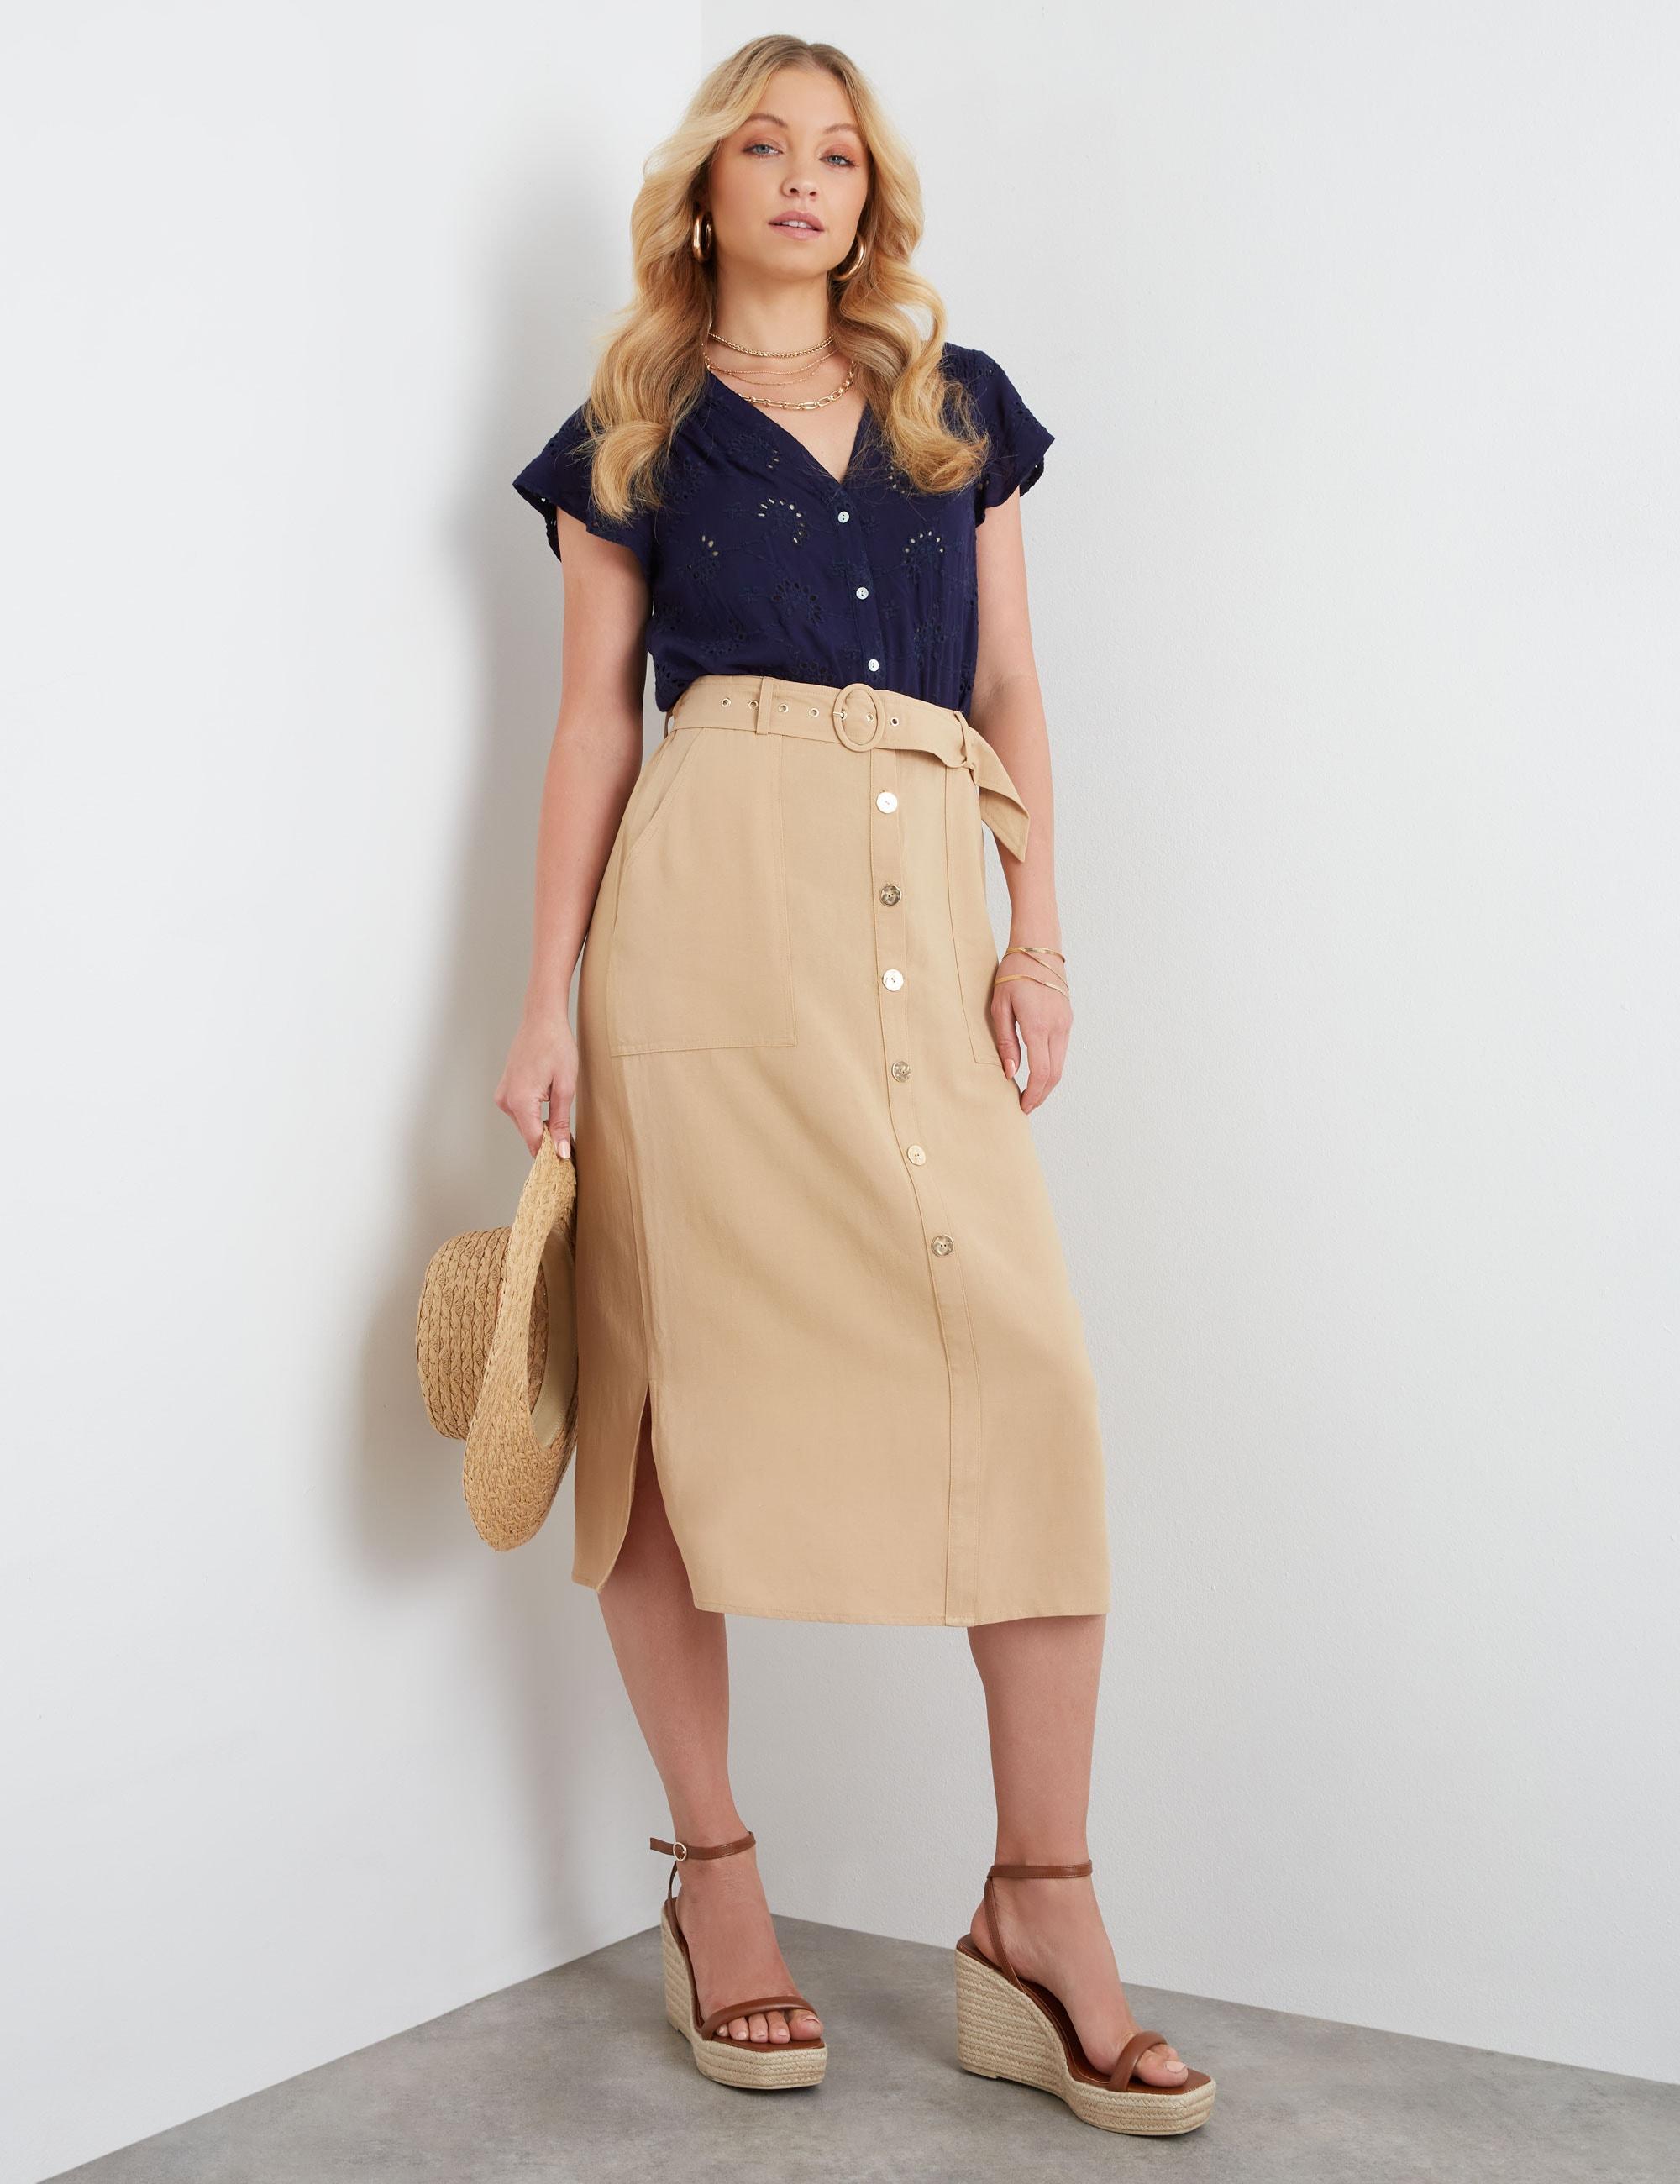 ROCKMANS - Womens Skirts - Midi - Summer - Brown - Linen - A Line - Fashion - Latte - Oversized - Button Belted - Knee Length - Casual Work Clothes